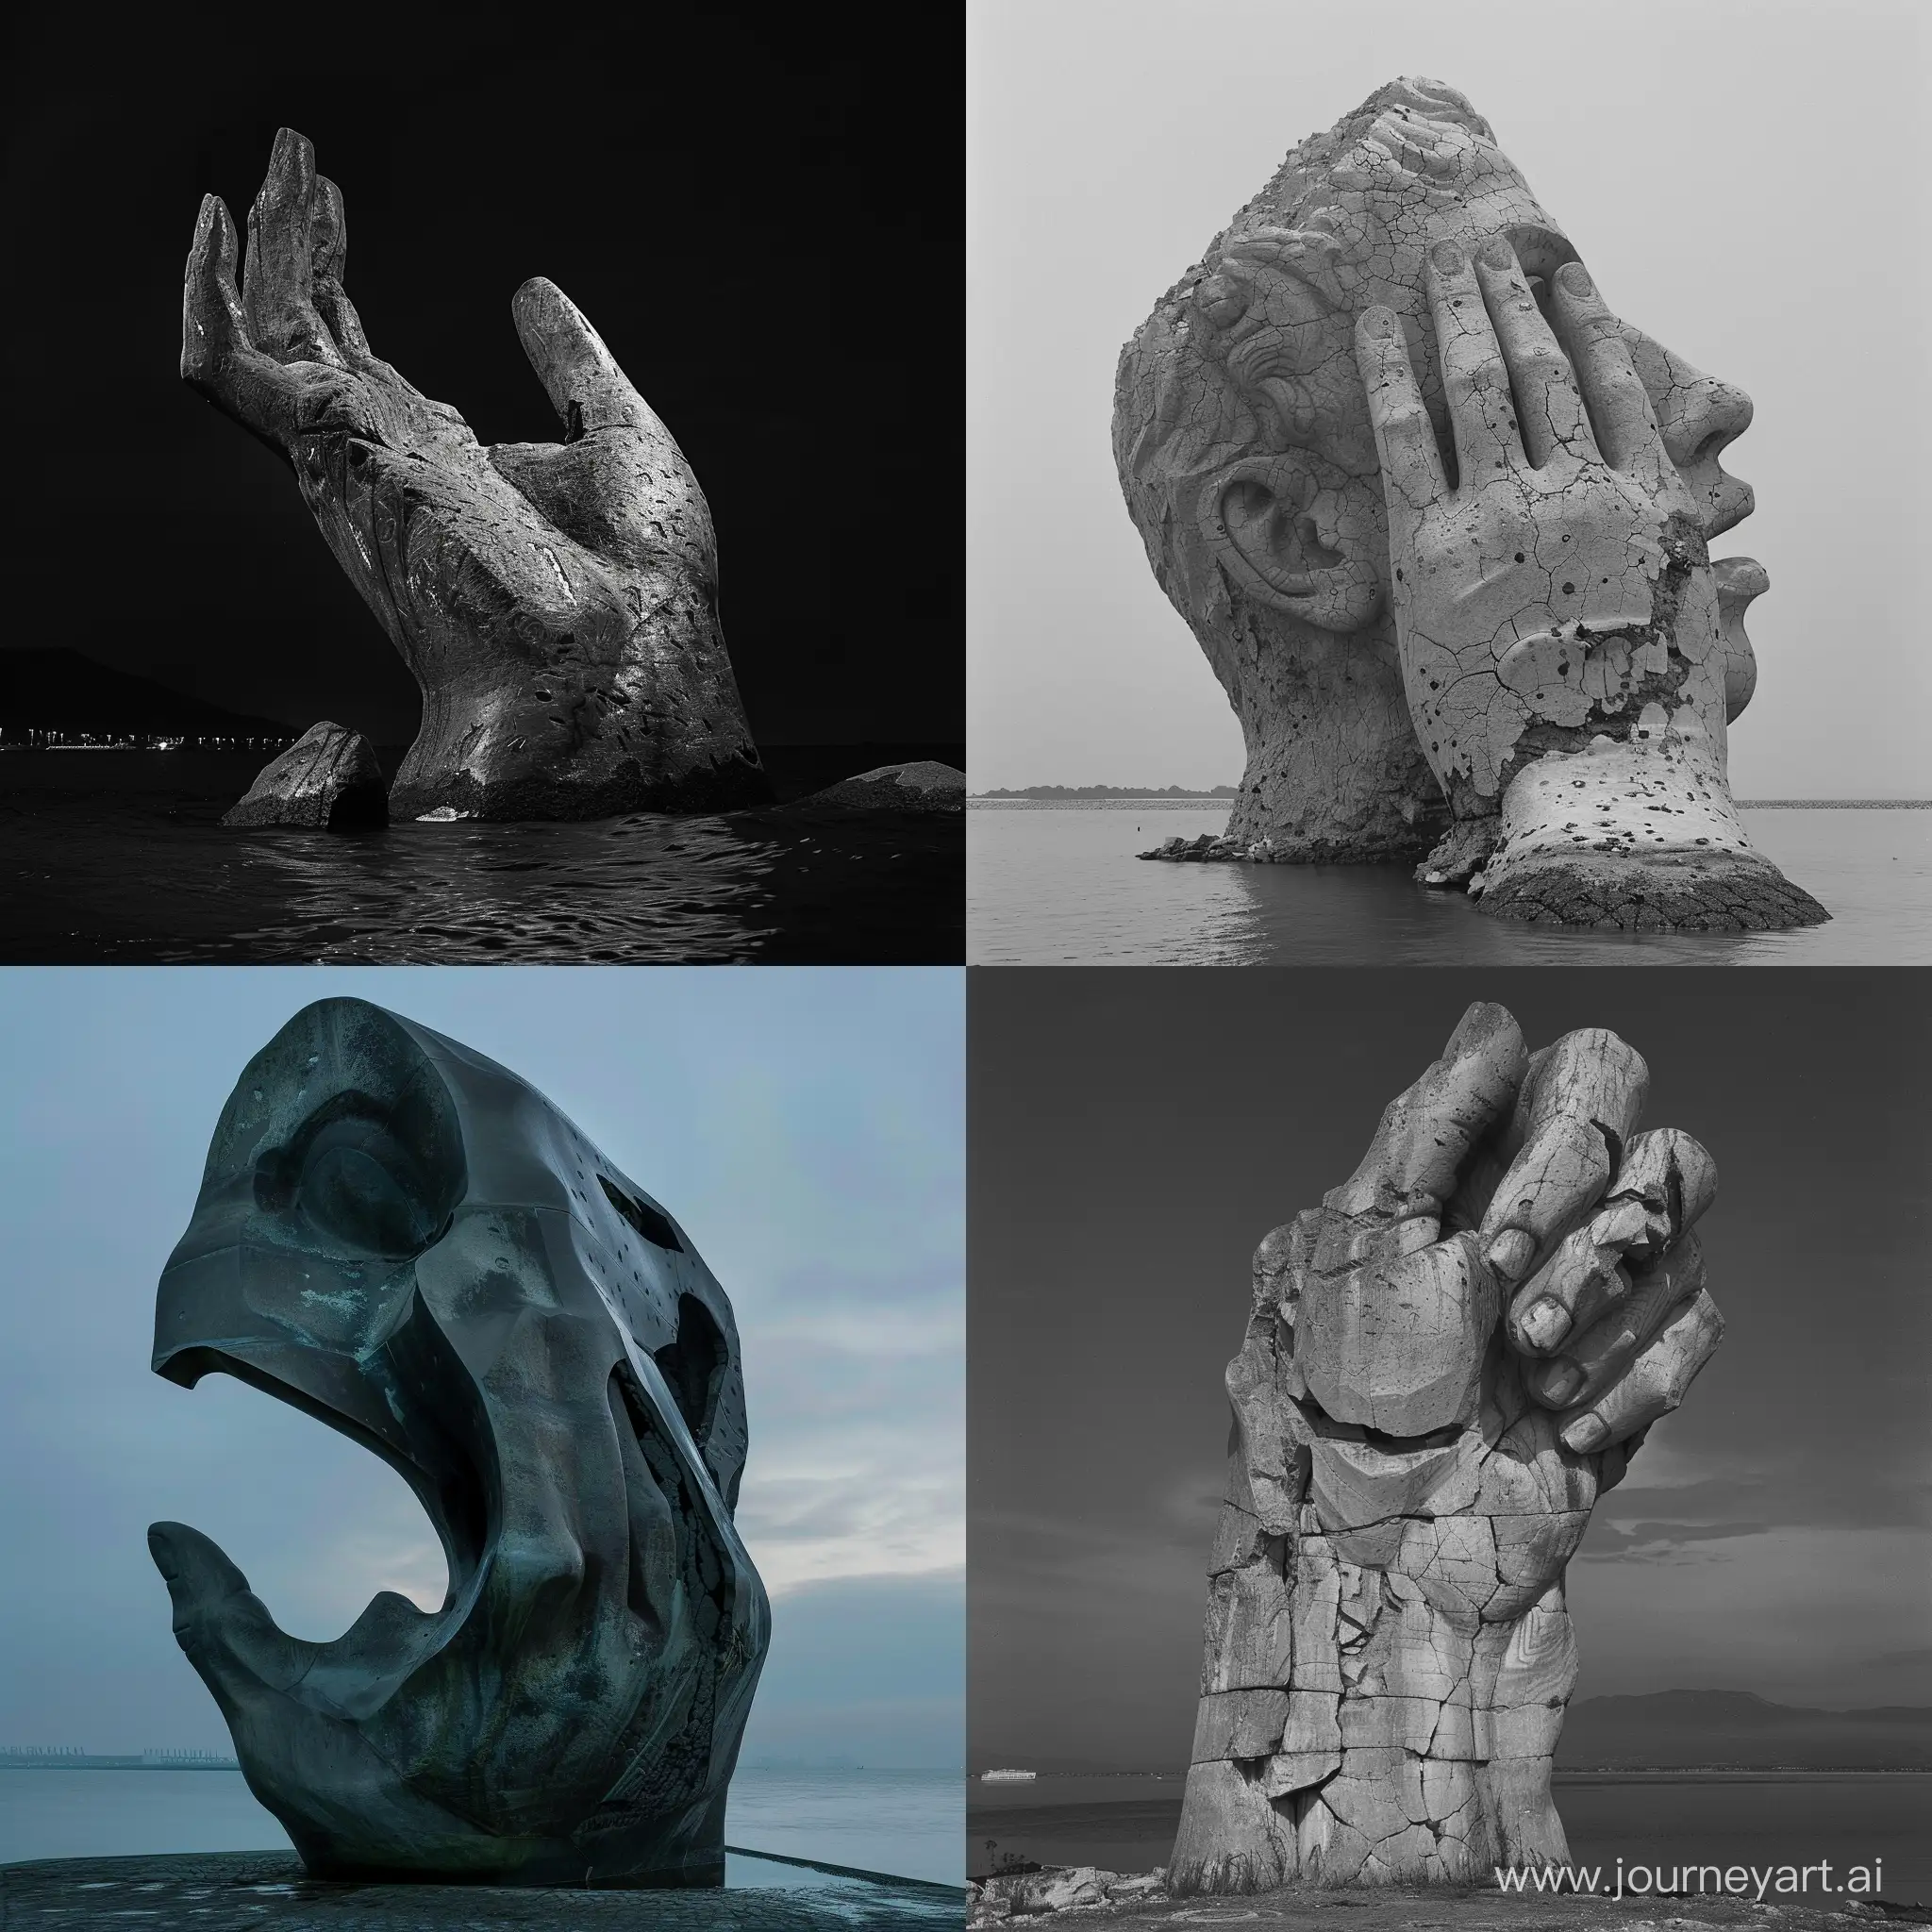 Nighttime-Statue-Collapse-Fragmentation-into-the-Bay